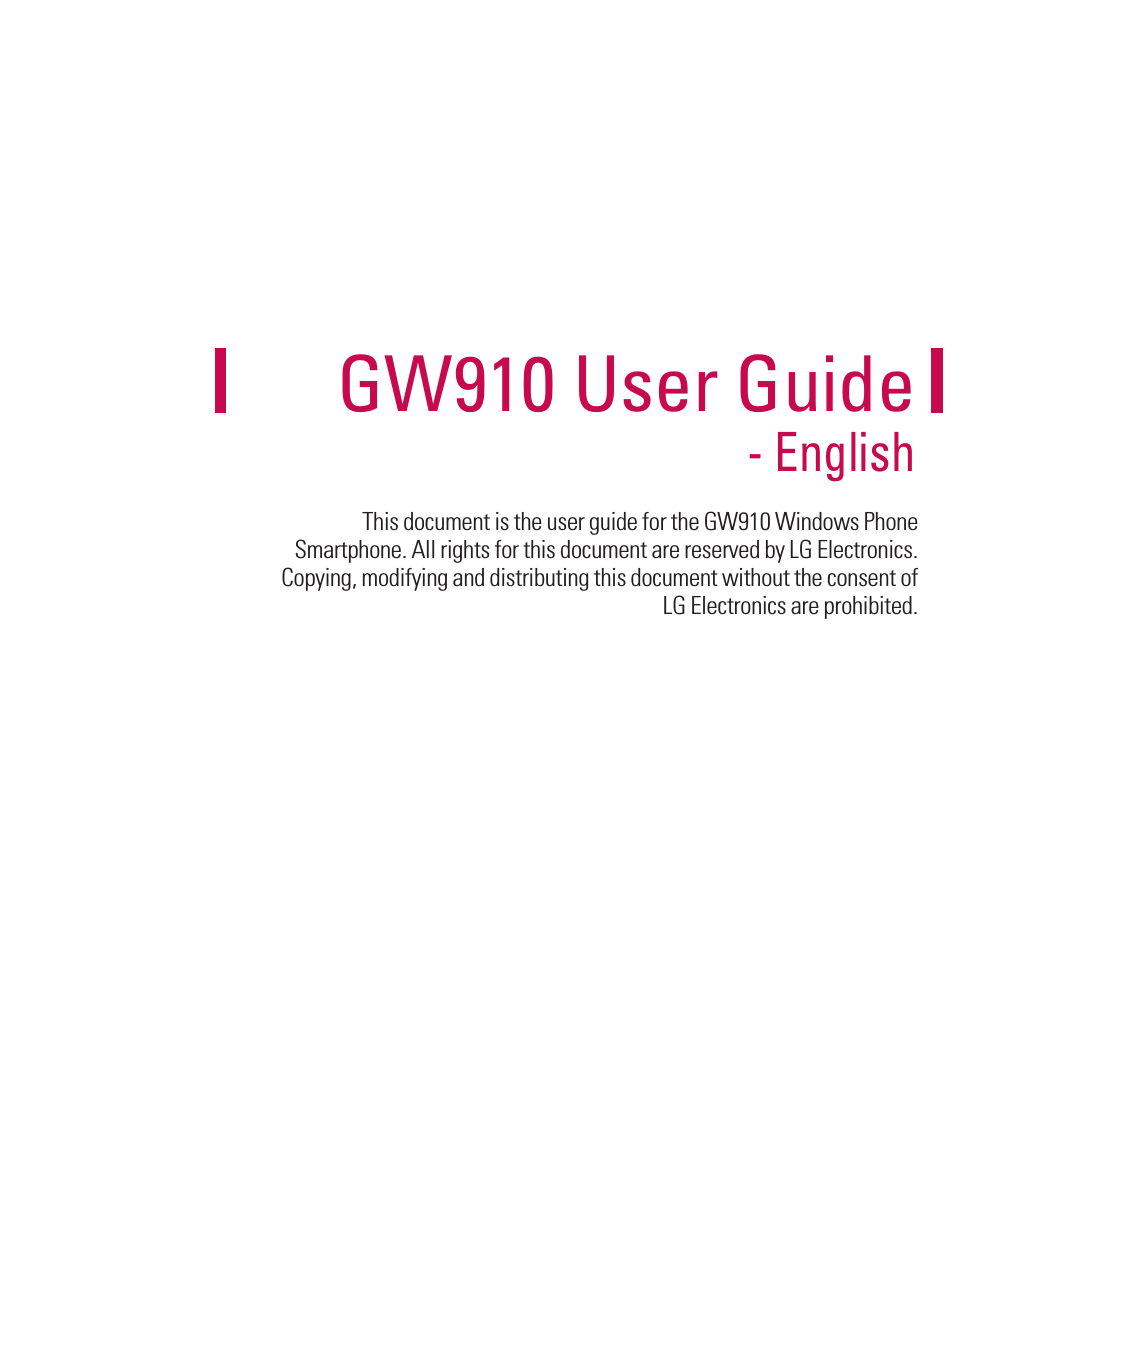 This document is the user guide for the GW910 Windows Phone Smartphone. All rights for this document are reserved by LG Electronics. Copying, modifying and distributing this document without the consent of LG Electronics are prohibited.GW910 User Guide - English